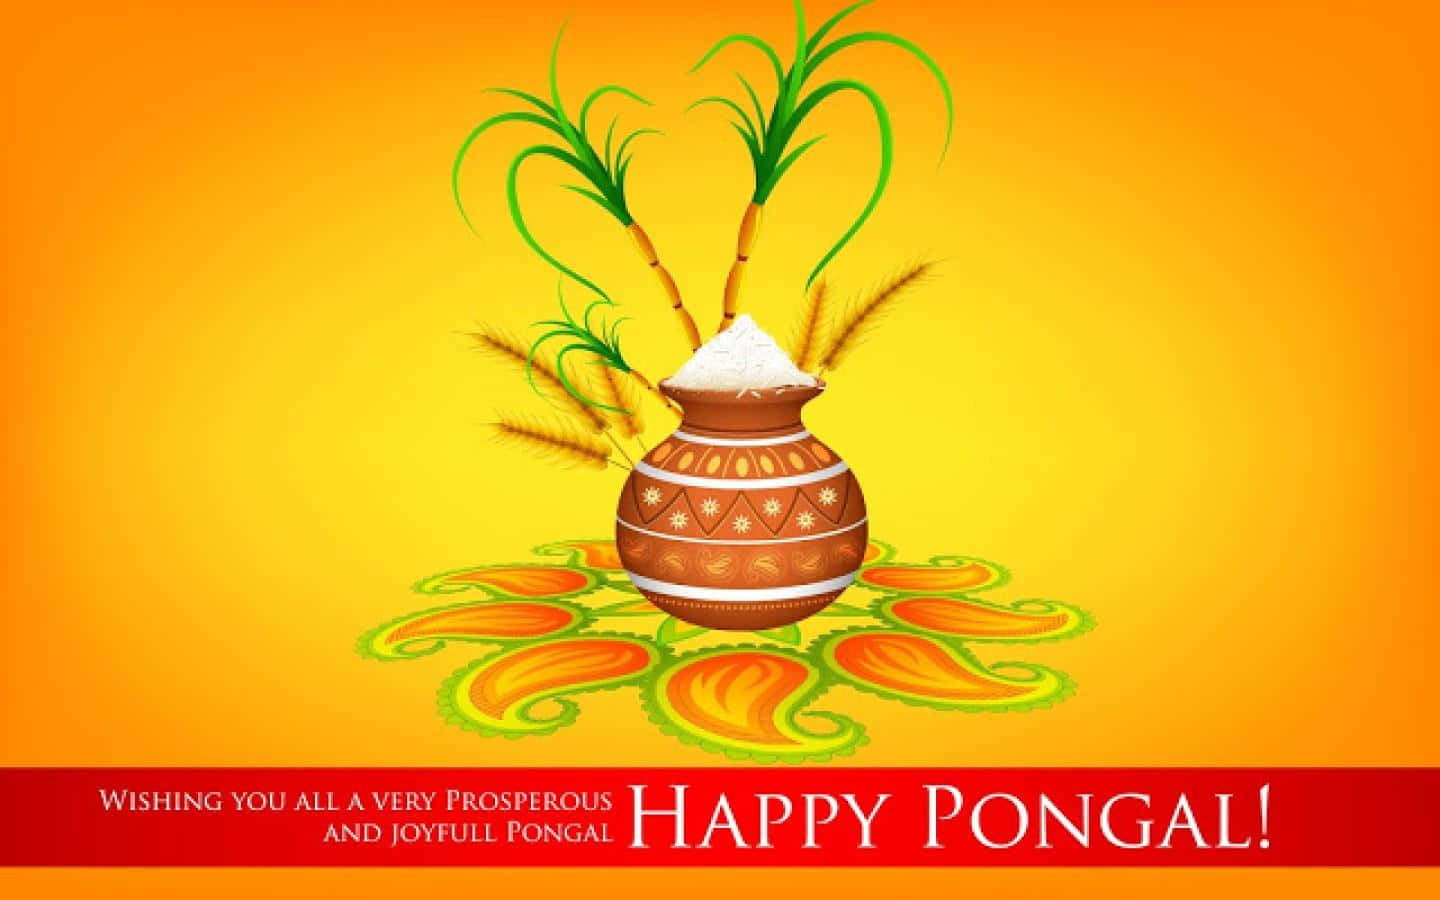 Celebrating Pongal with delicious dishes